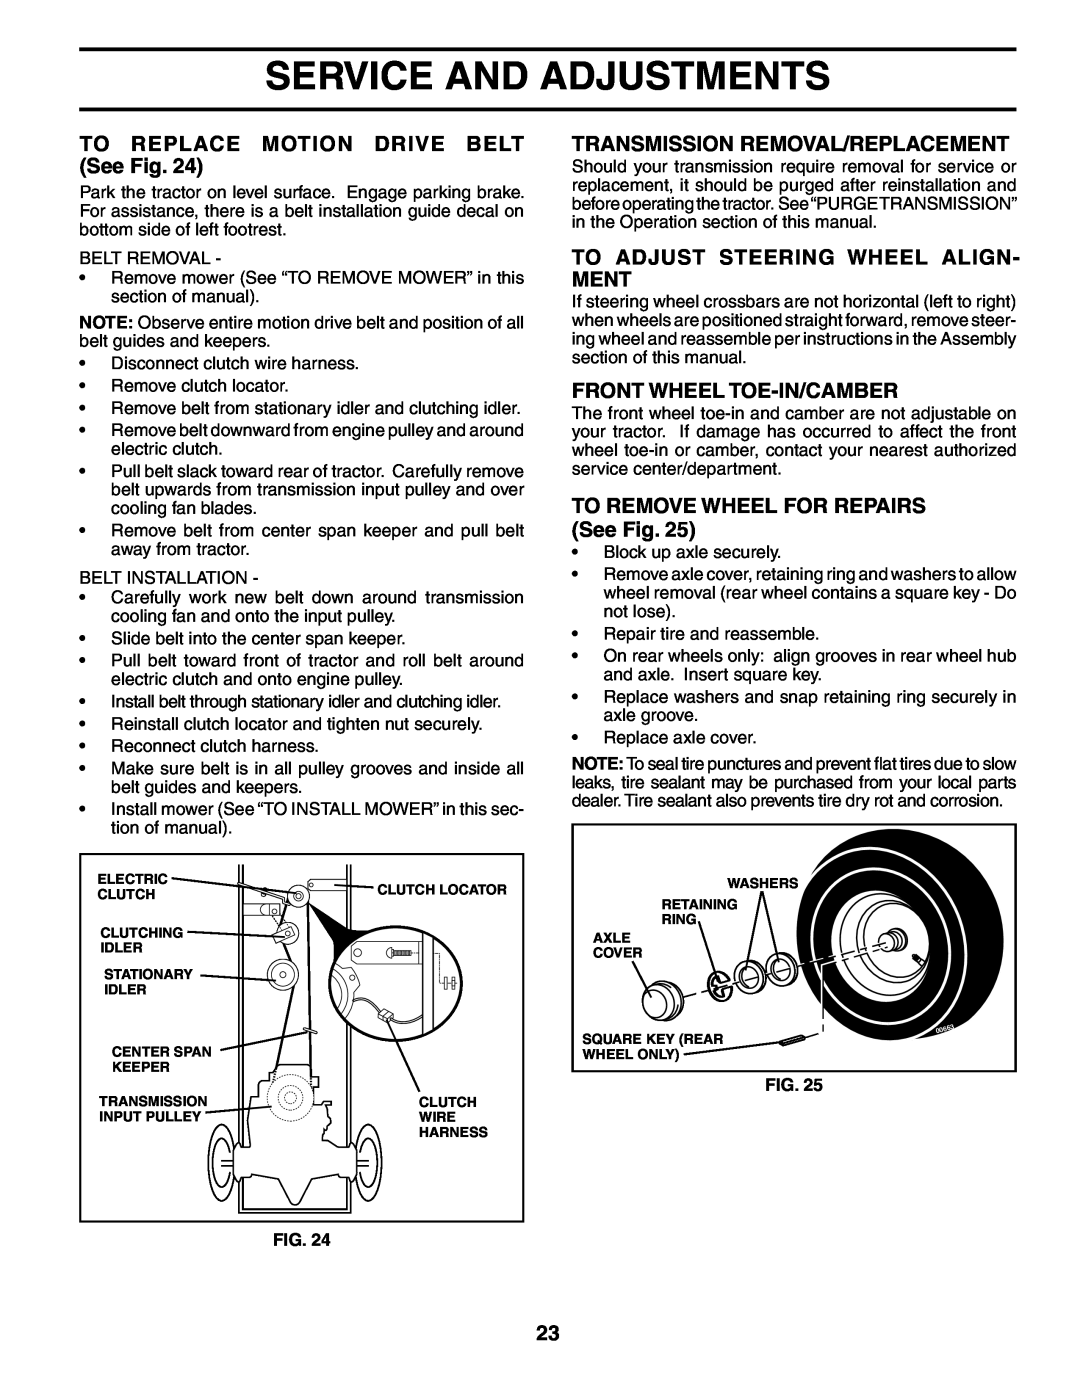 Poulan PD24PH48ST manual TO REPLACE MOTION DRIVE BELT See Fig, Transmission Removal/Replacement, Front Wheel Toe-In/Camber 